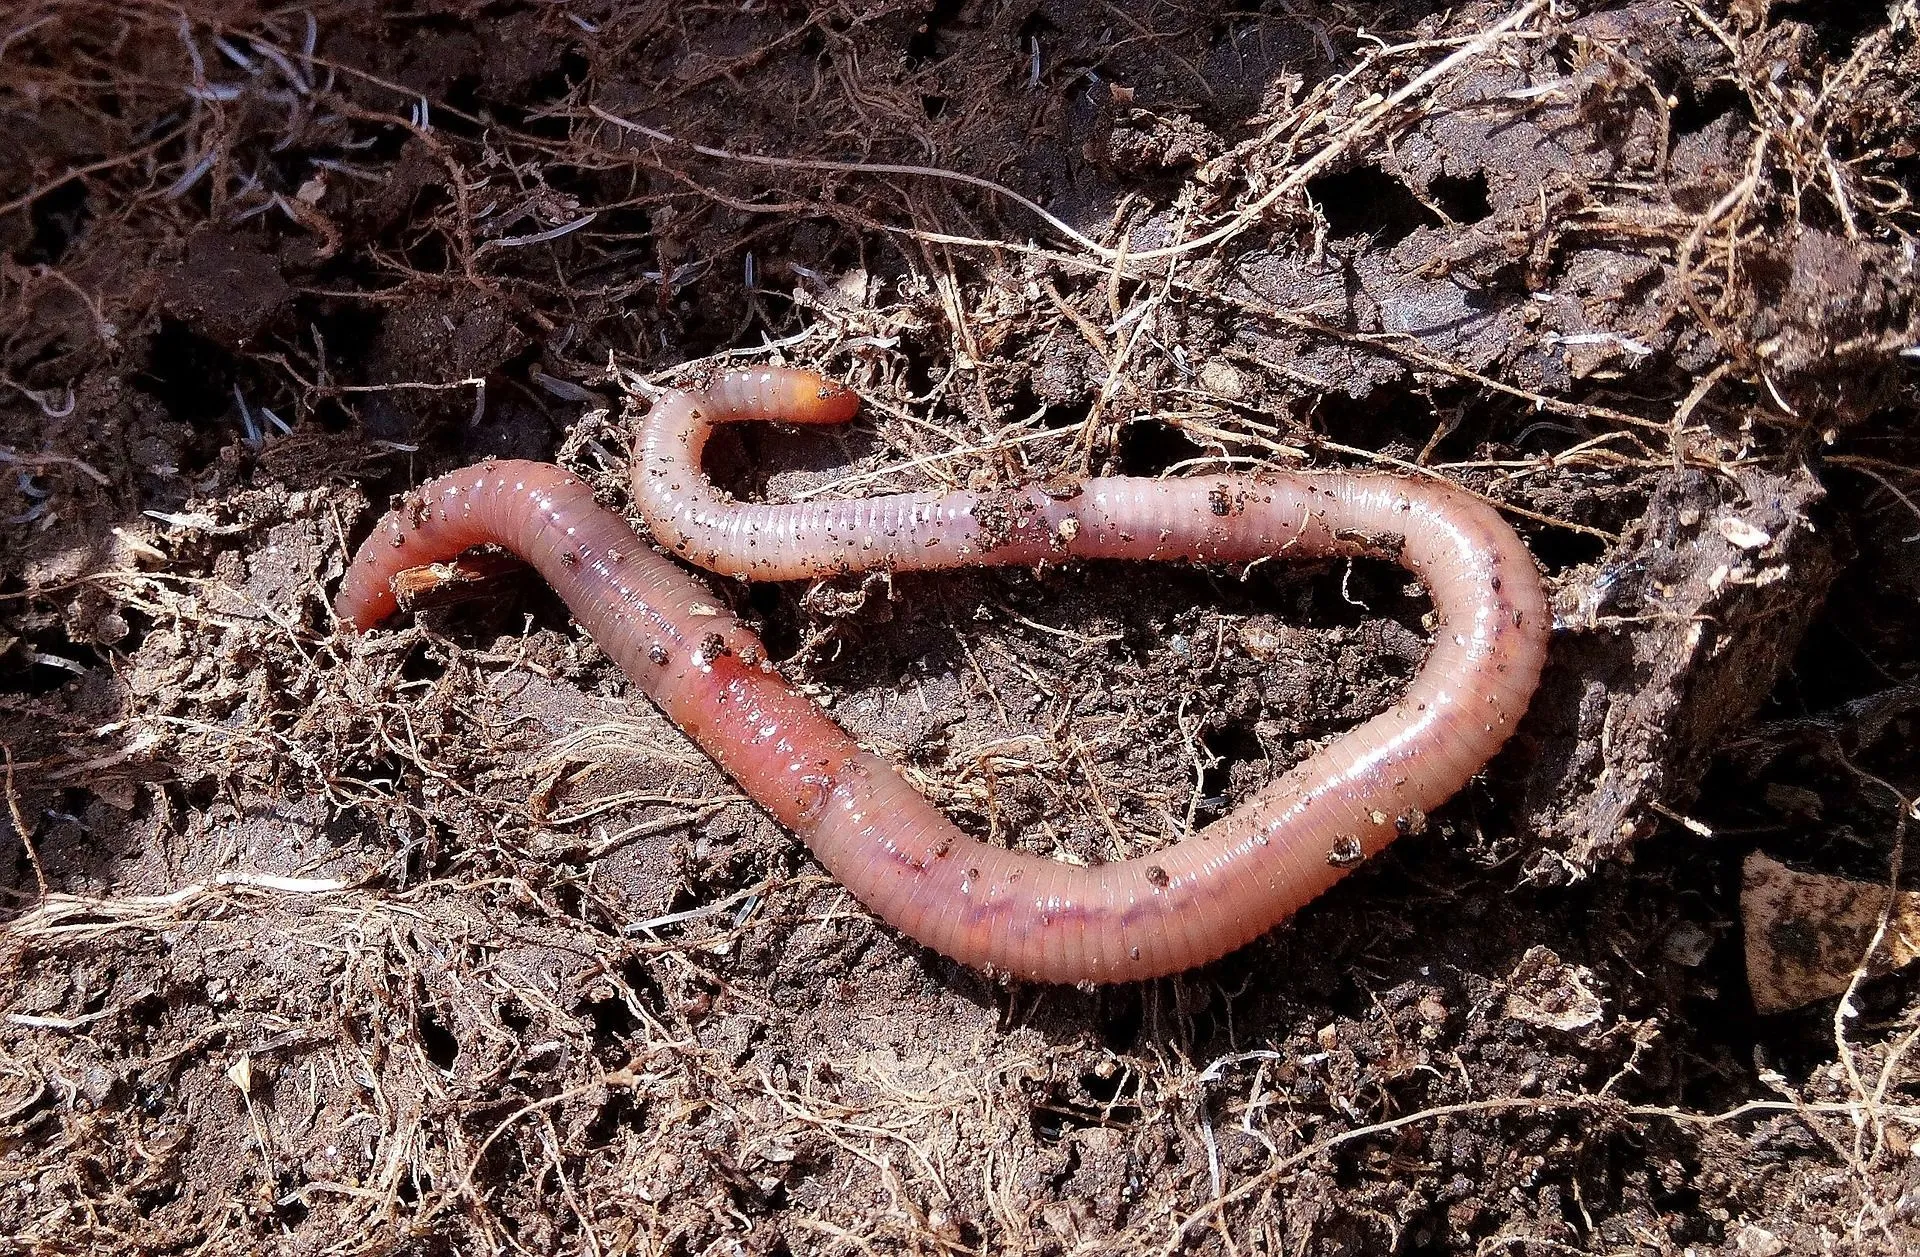 How Do Worms Reproduce? Interesting Insect Facts All Kids Should Know